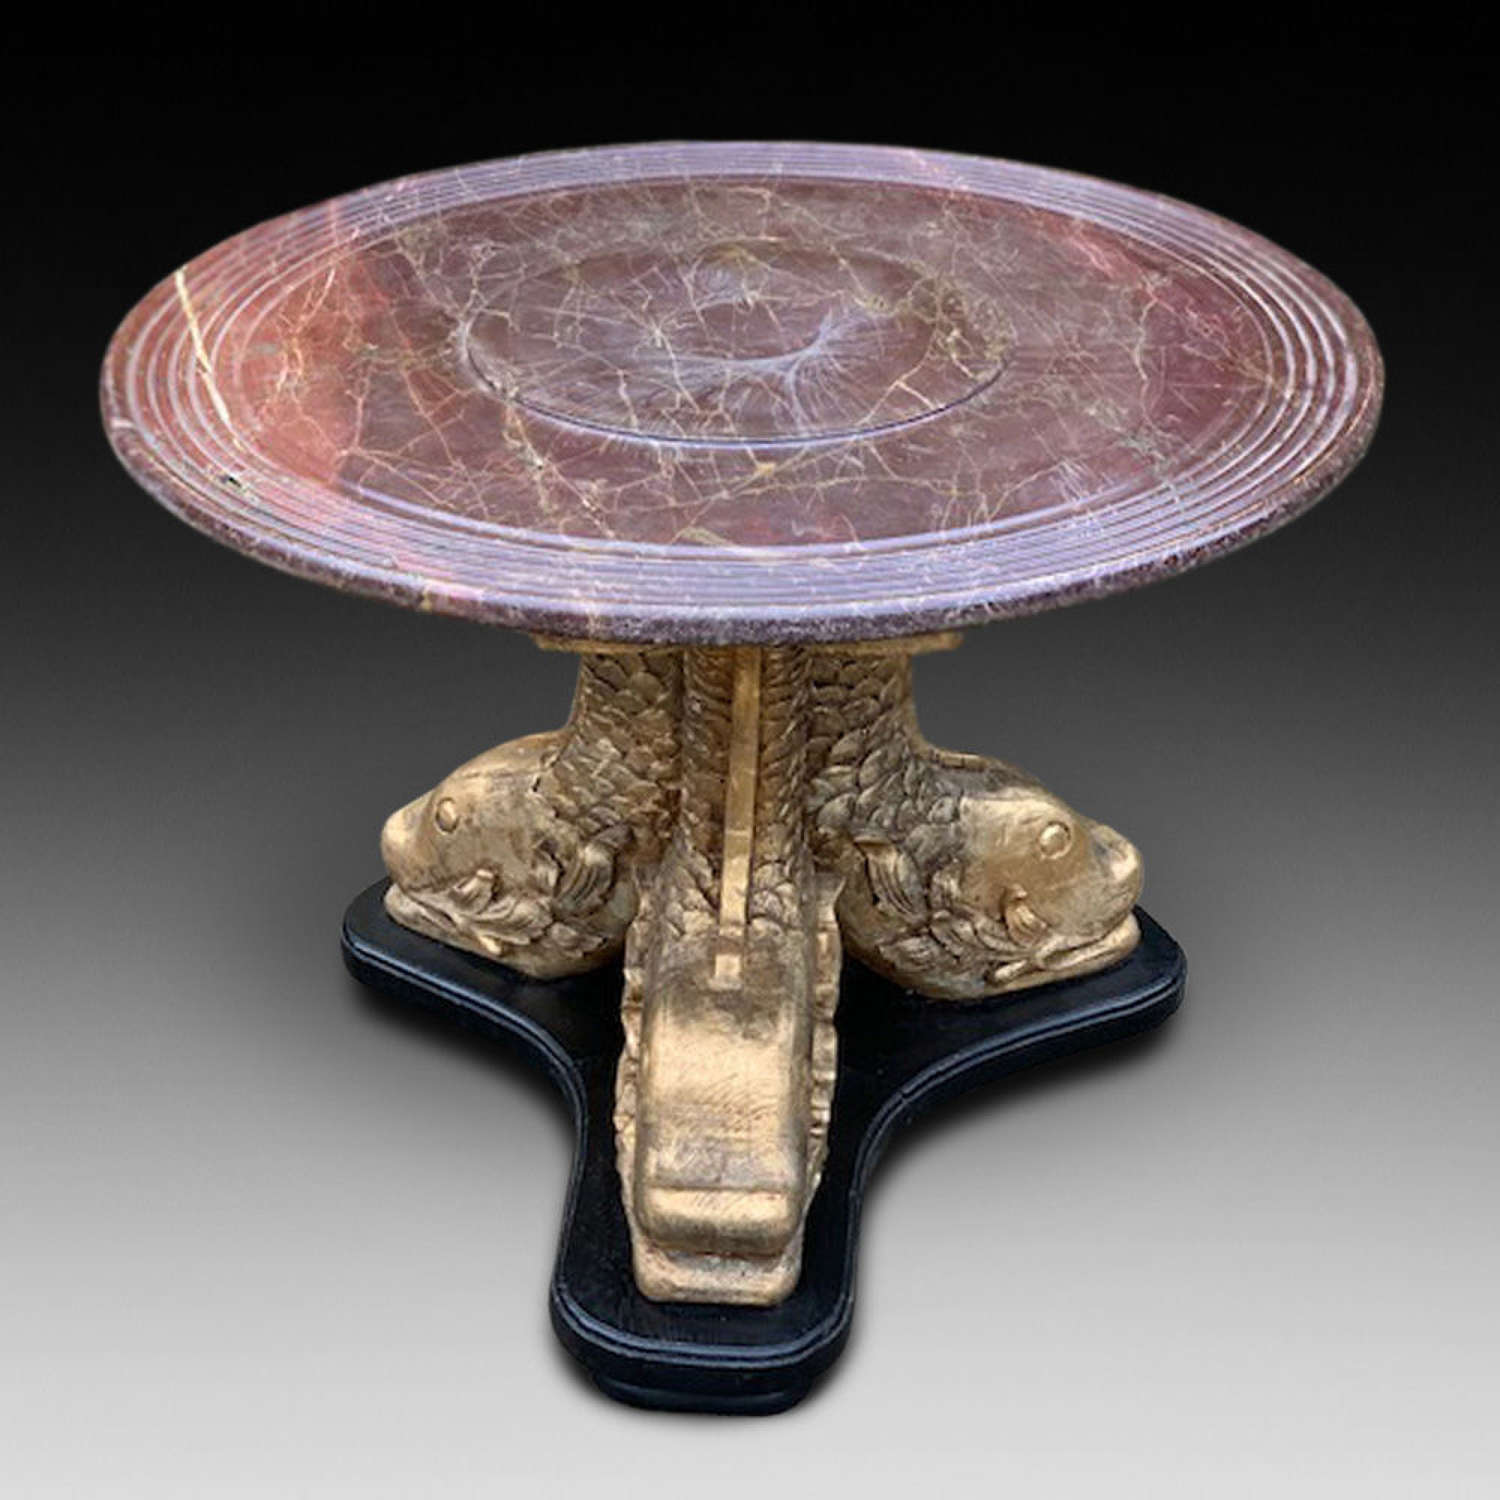 Very Unusual and Impressive Dolphin Centre Table c.1880